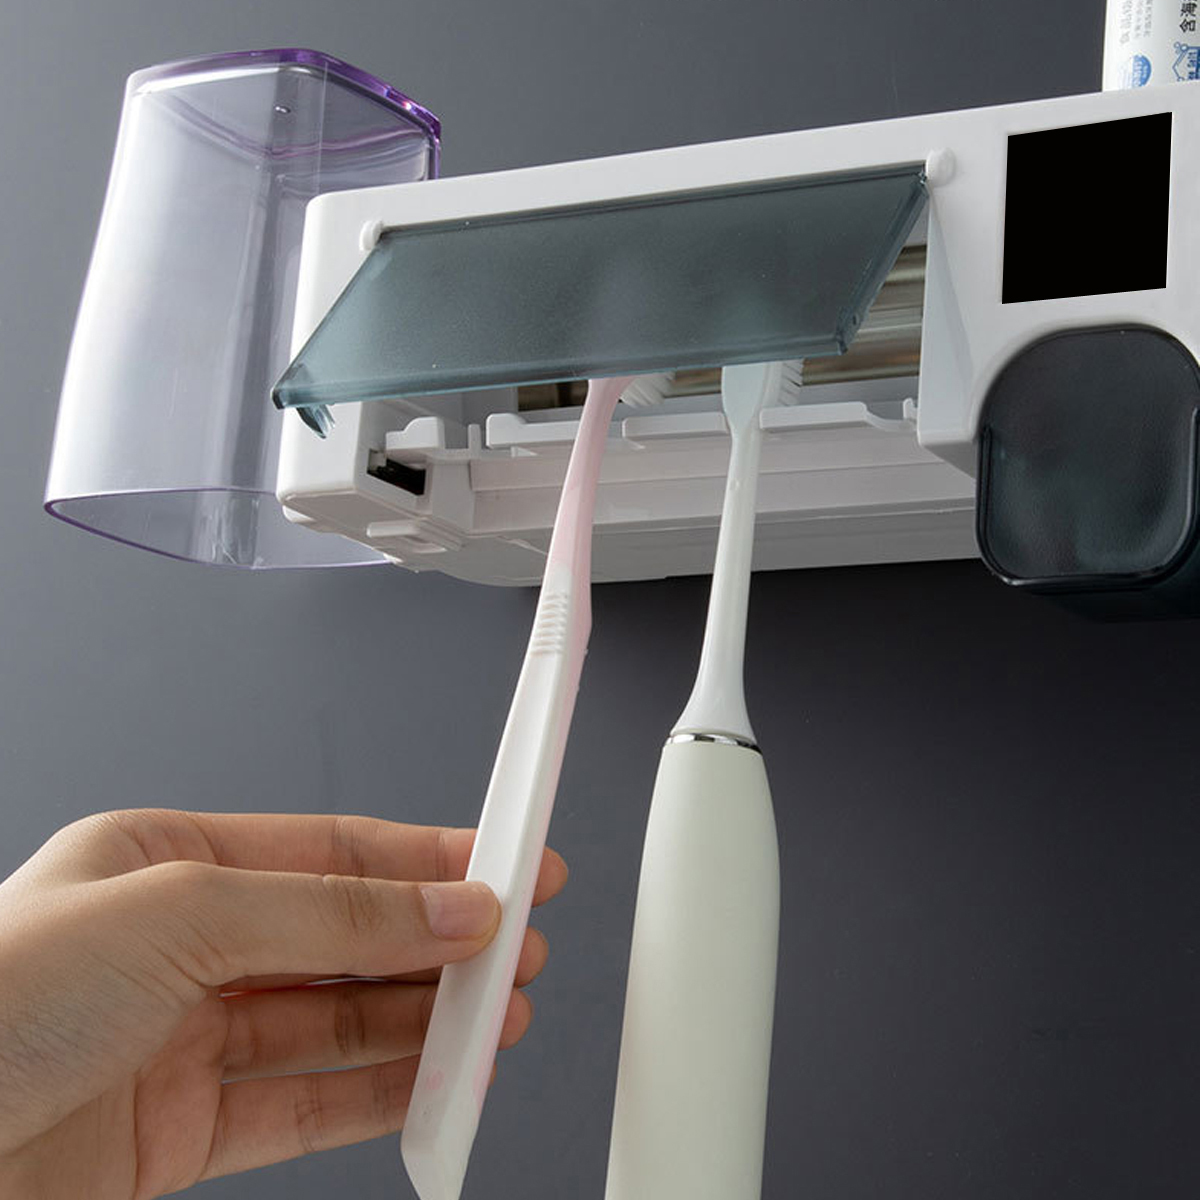 Ultraviolet-Electric-Toothbrush-Sterilizer-Wall-Mount-Toothbrush-Storage-Holder-Automatic-Toothpaste-1681238-10